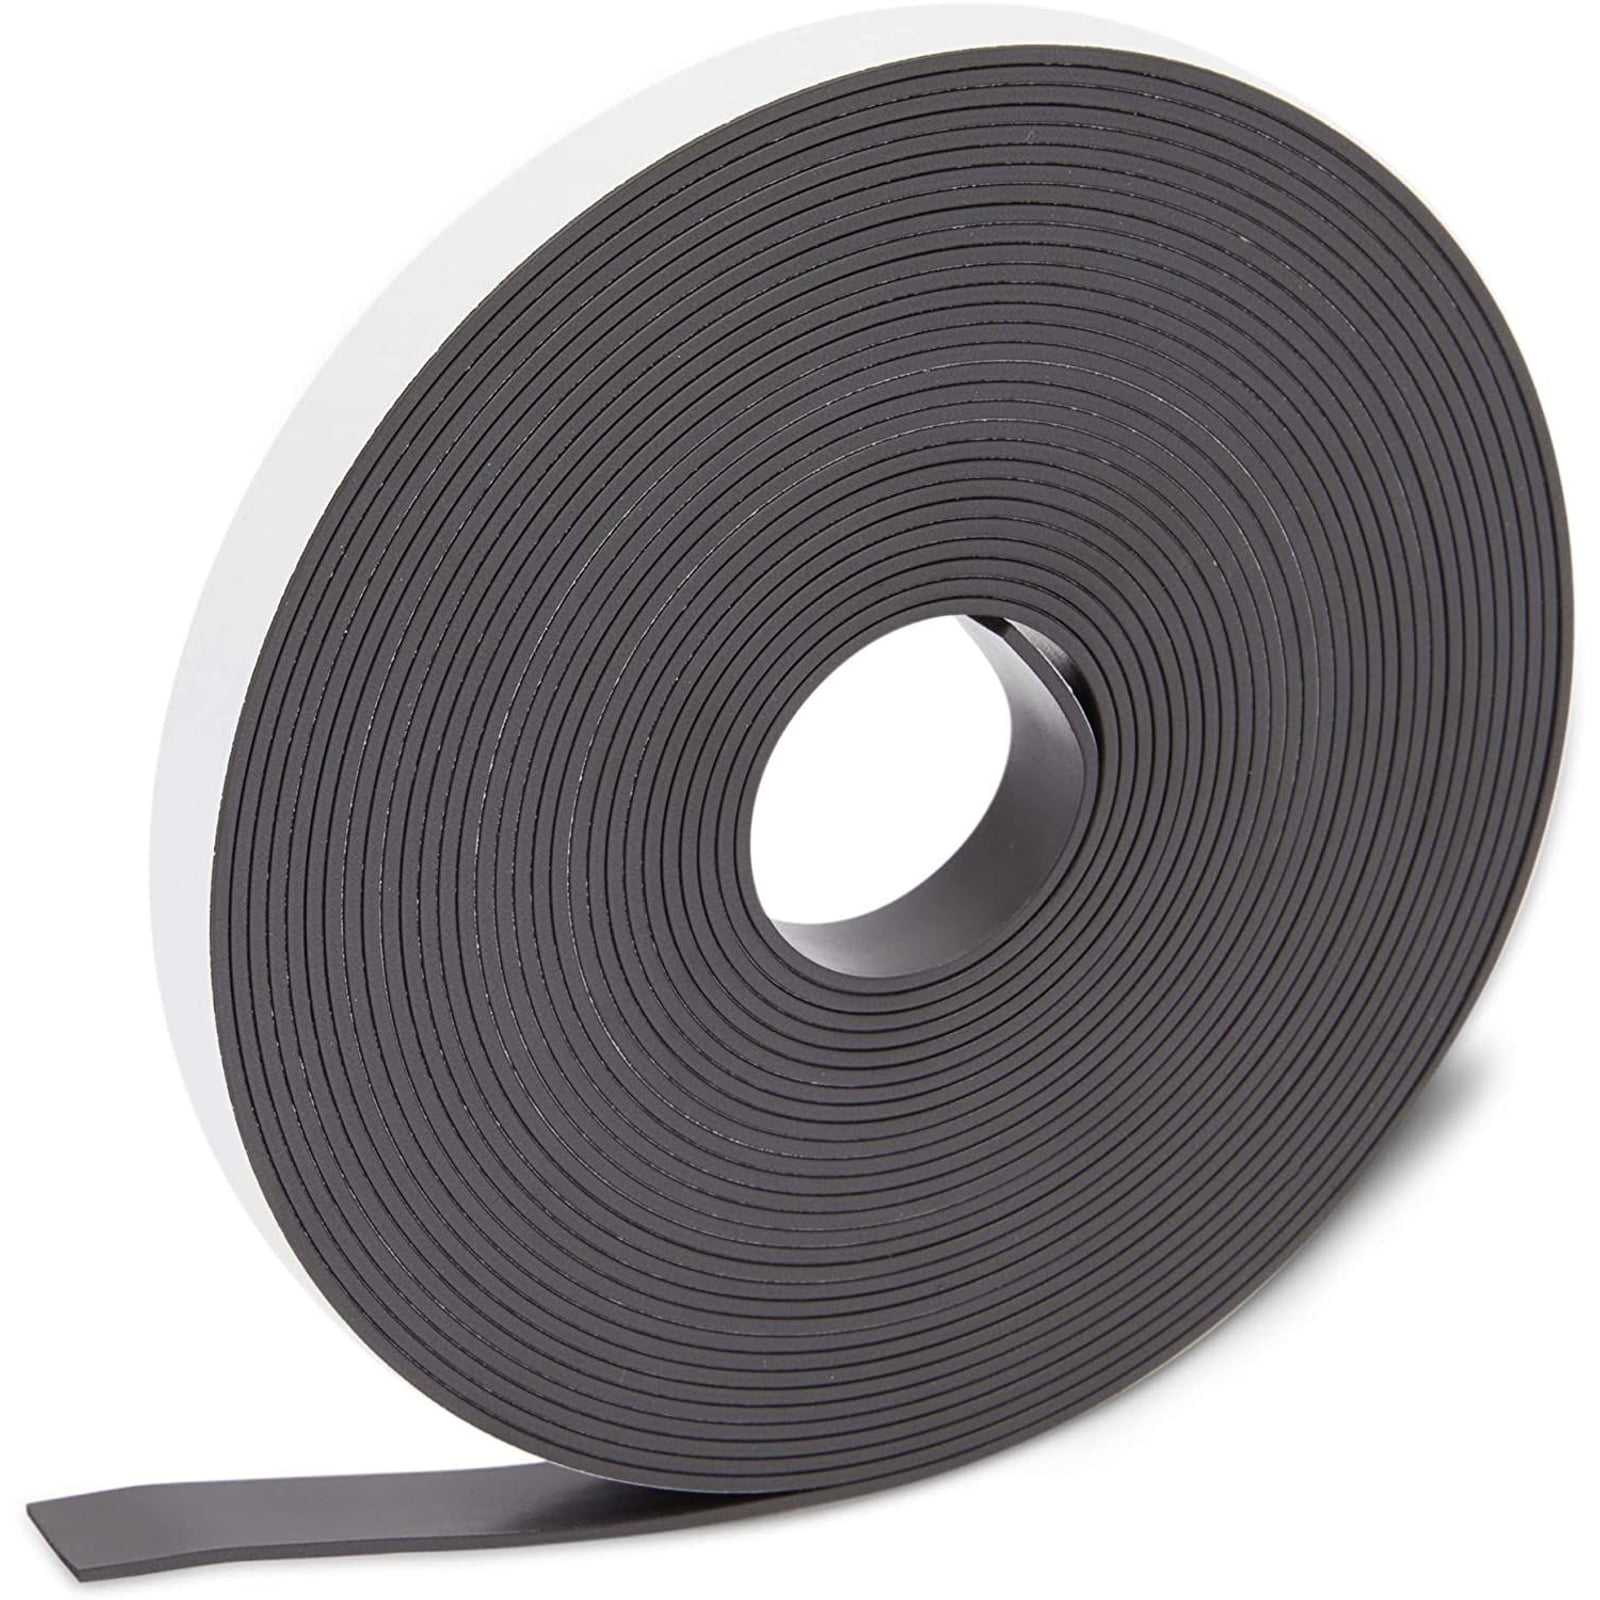 Thicker and Stronger Adhesive Back Magnet Strip for White Board Fridge Automotive Black Dry Erase Tape King Flexible Magnetic Tape 1-Inch x 15 Feet